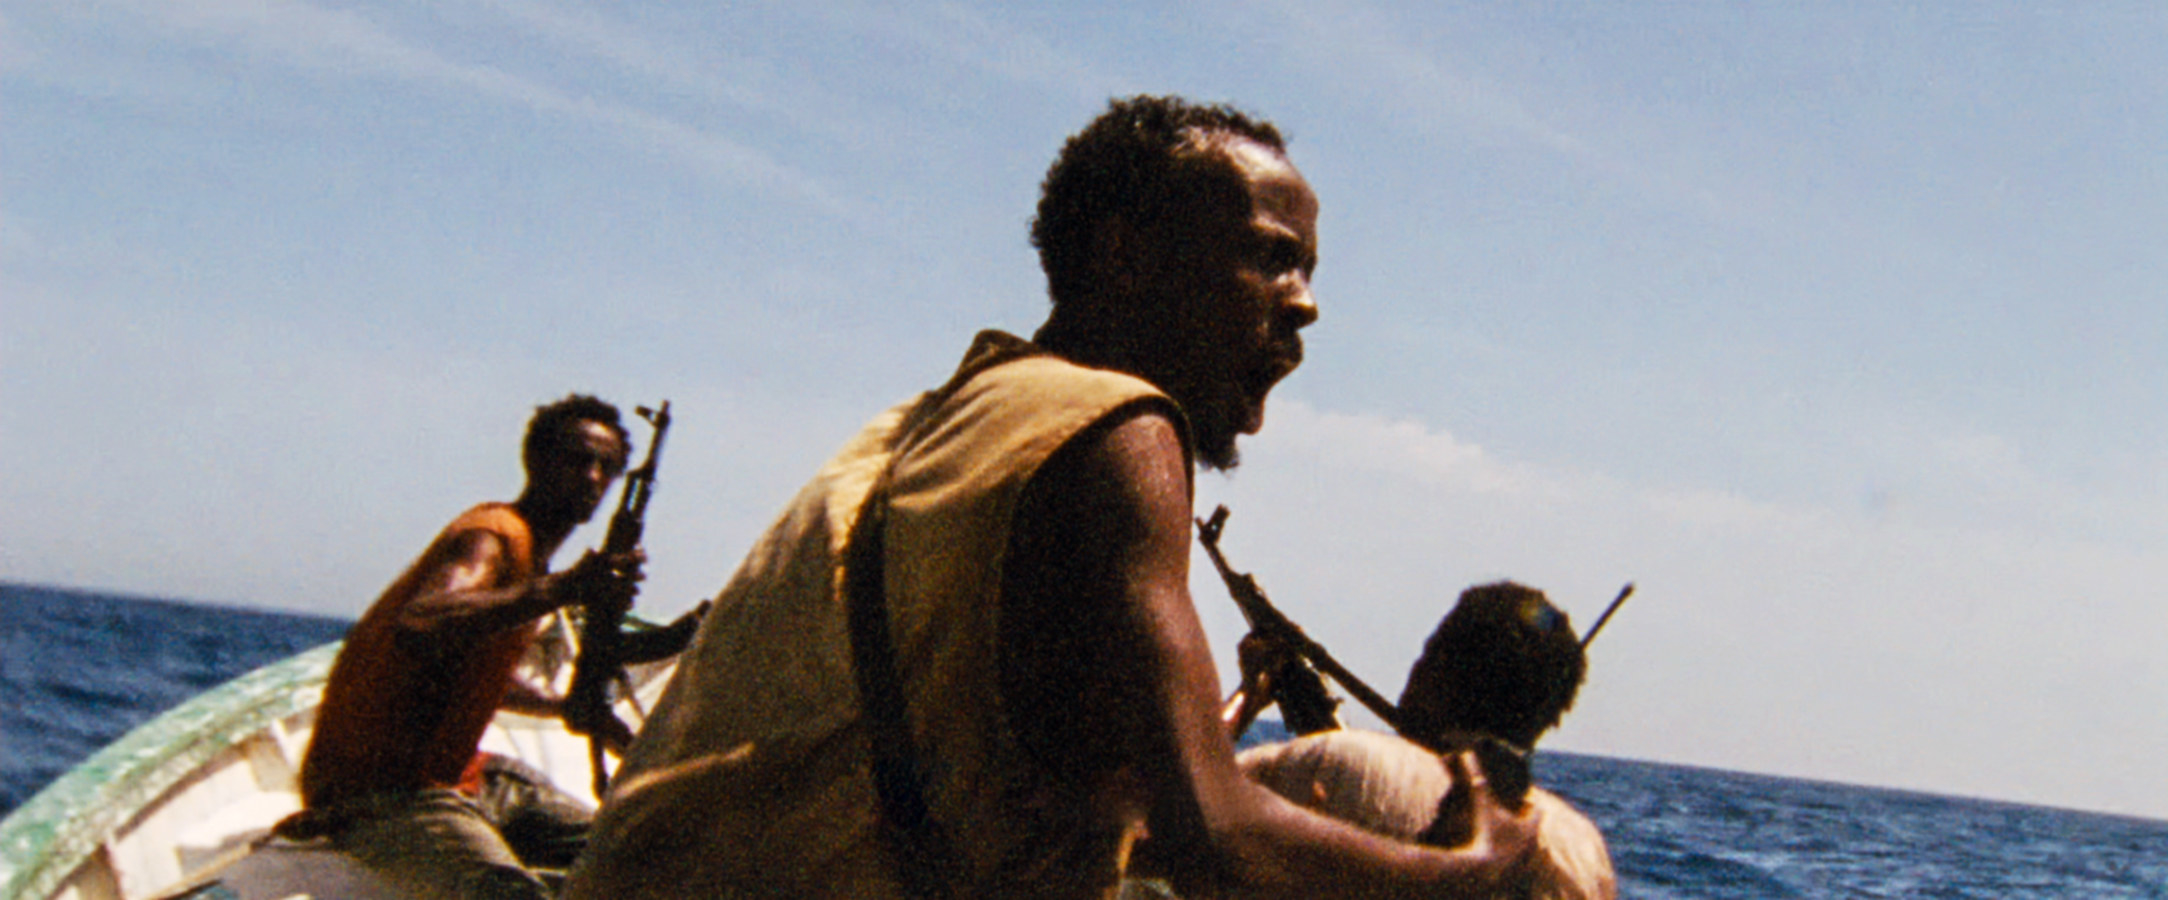 Barkhad&#x27;s character on a small boat